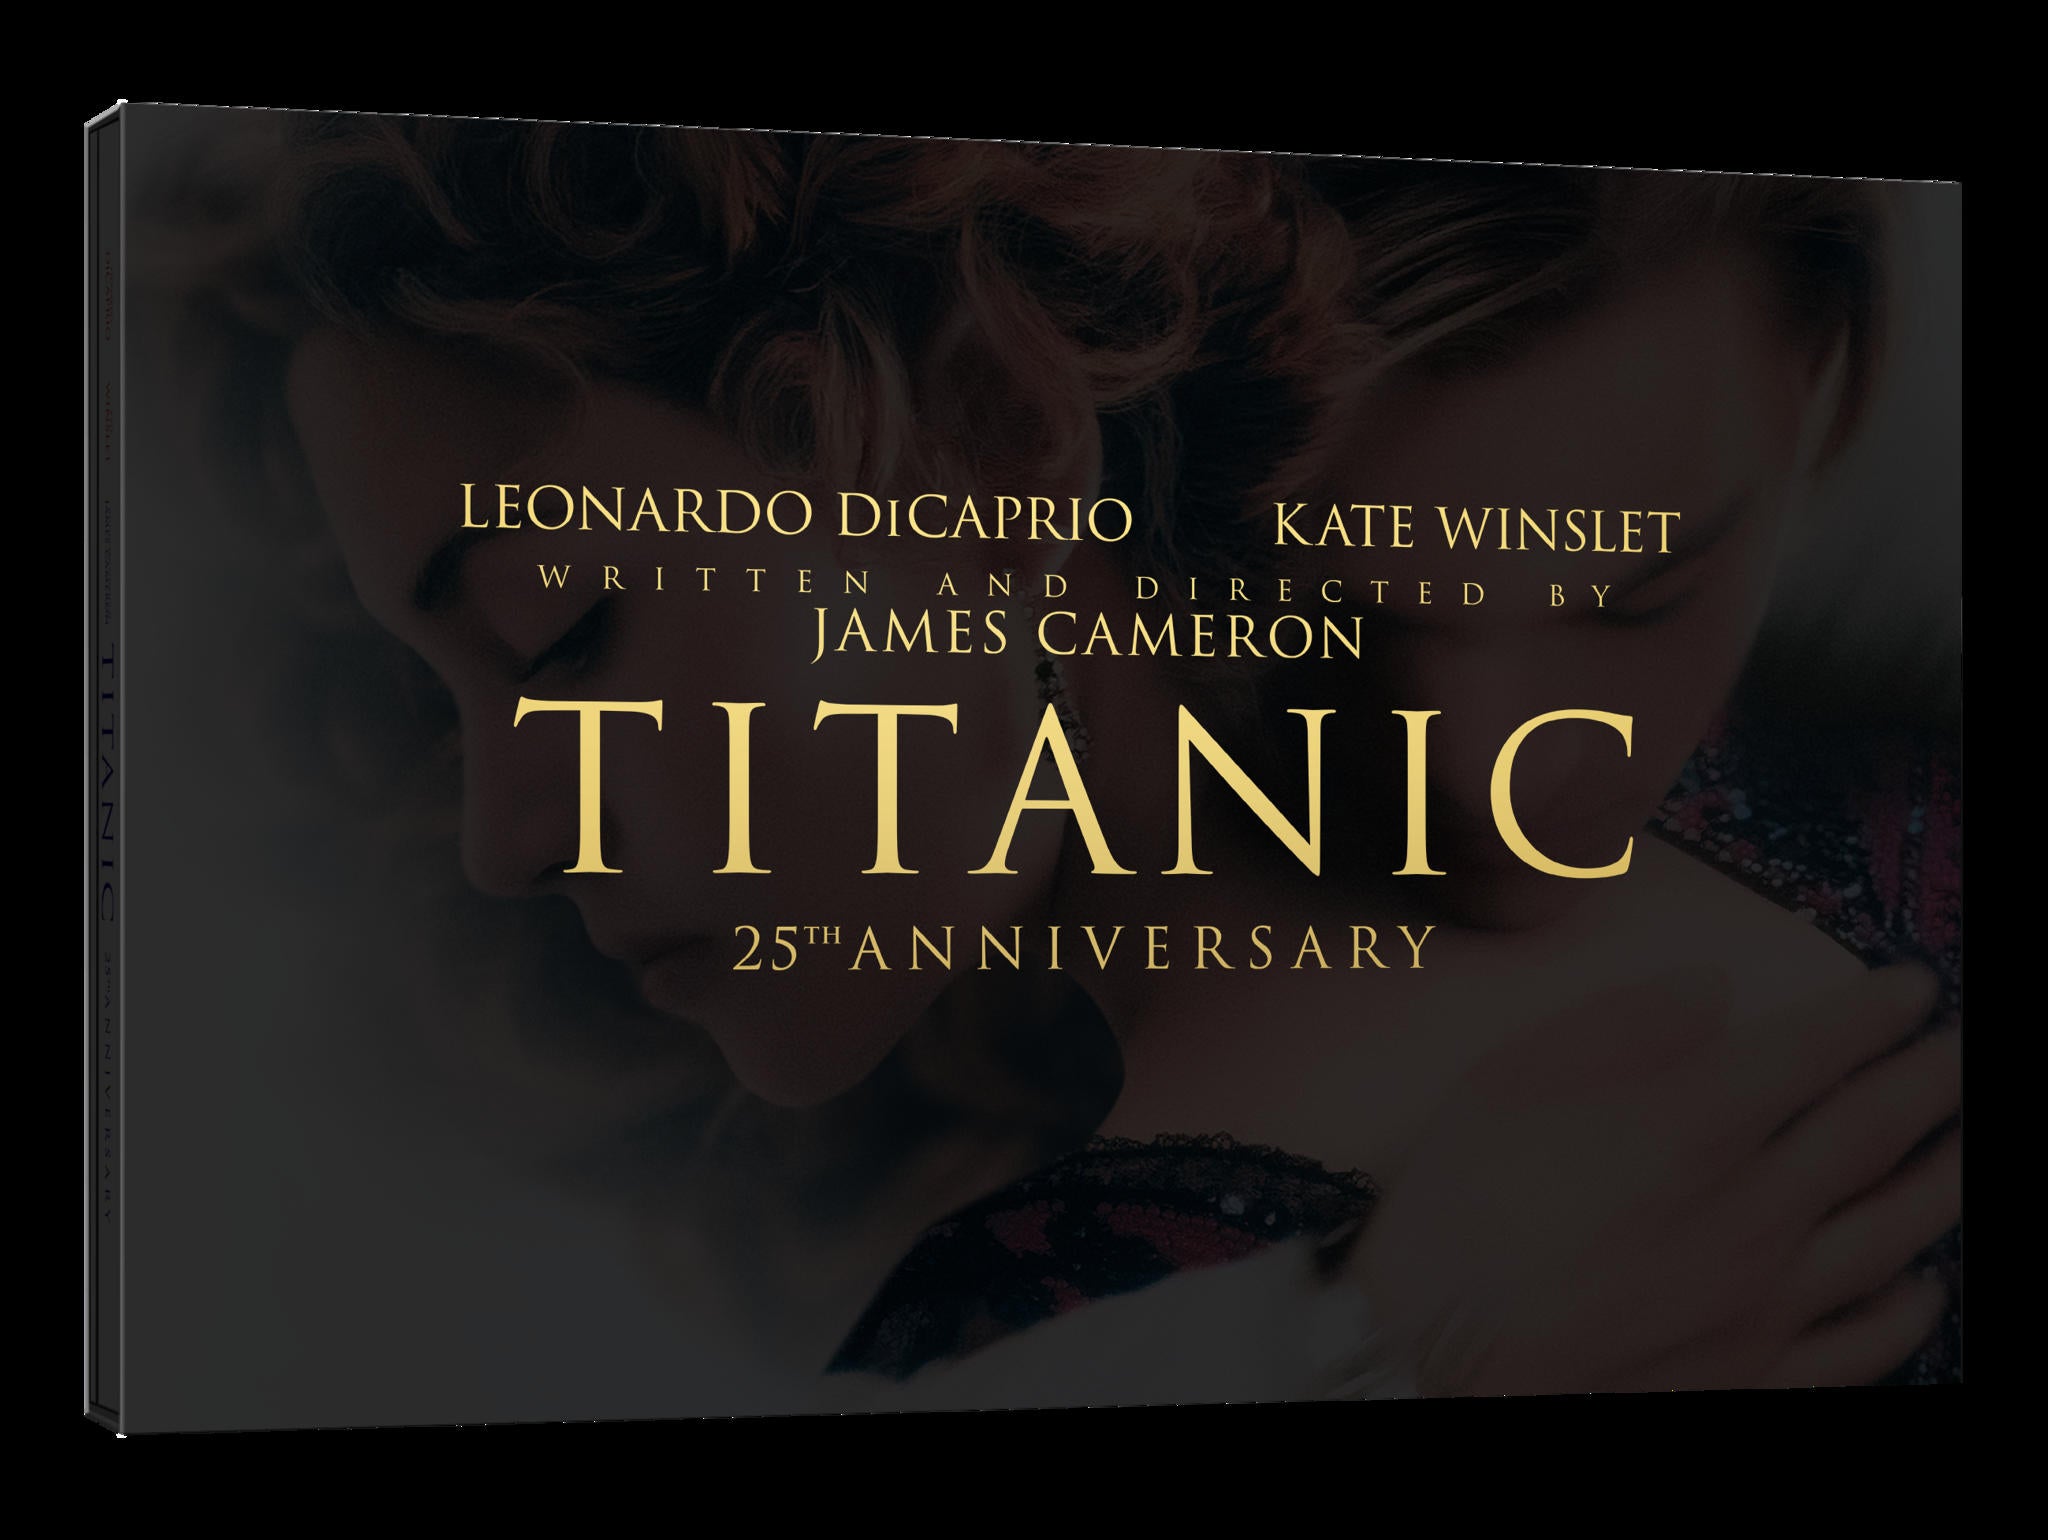 Titanic 4K Blu-ray And Collector's Edition Are Both On Sale